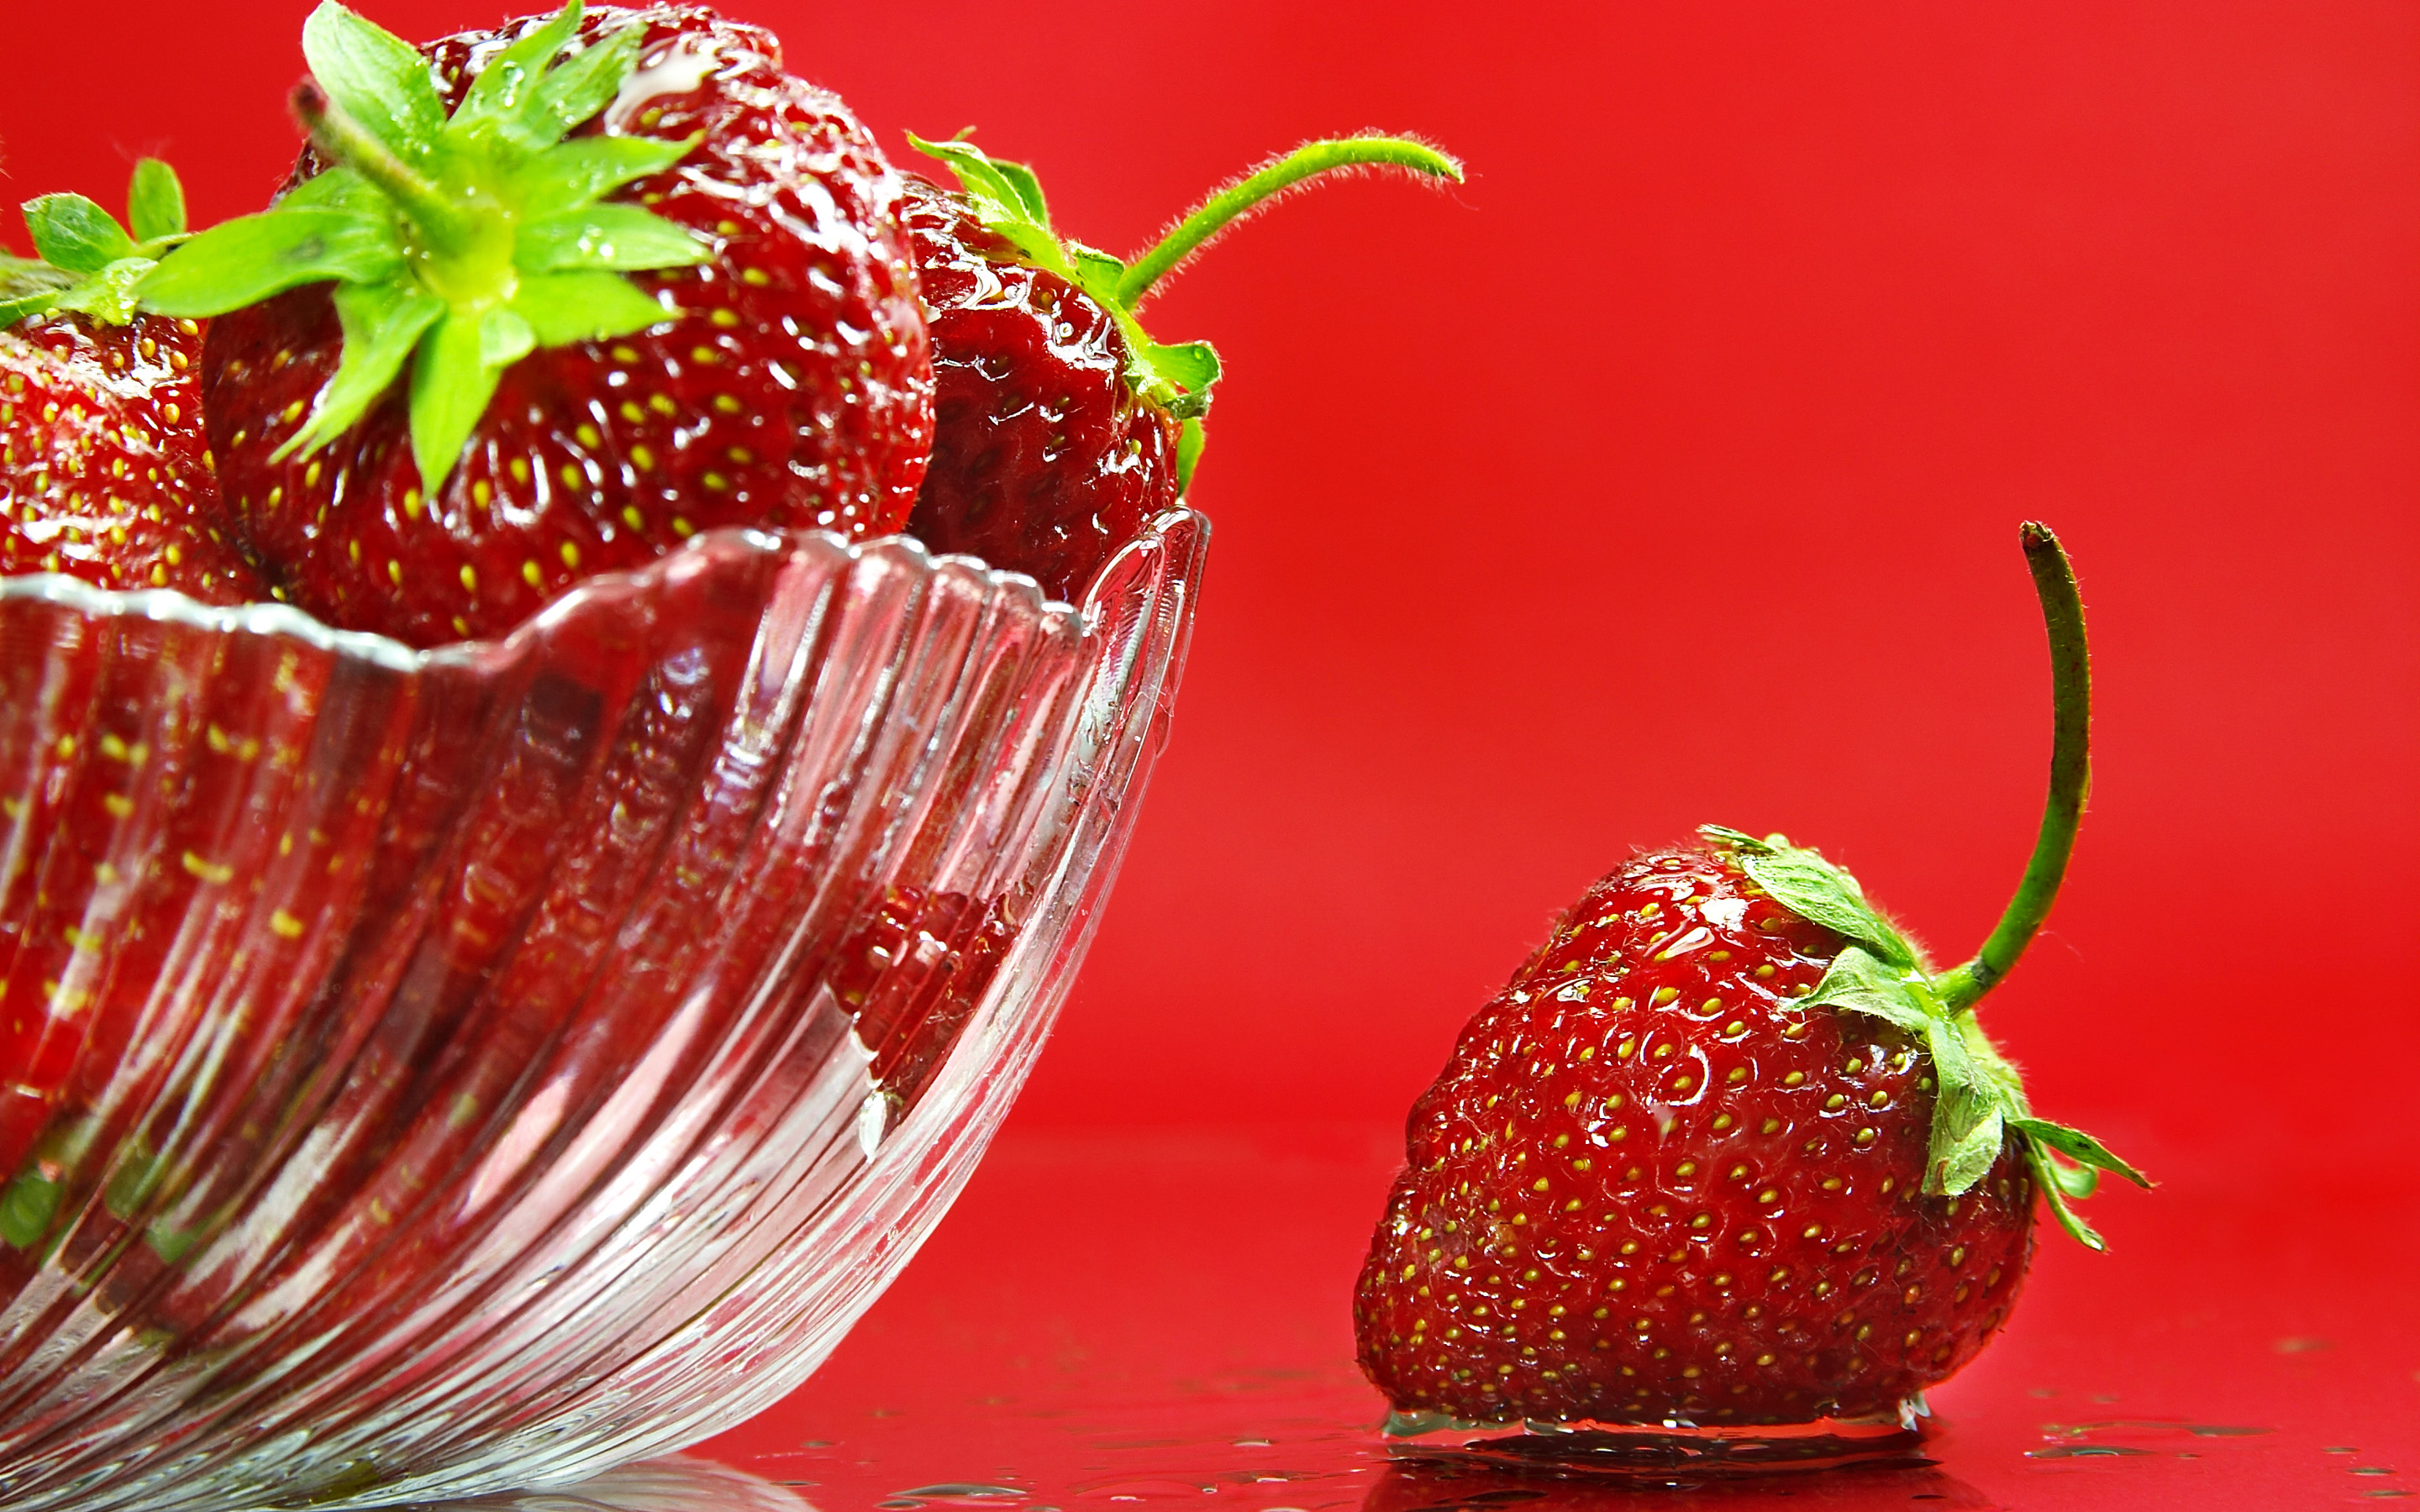 HD Red Strawberries Wallpaper High Resolution Full Size